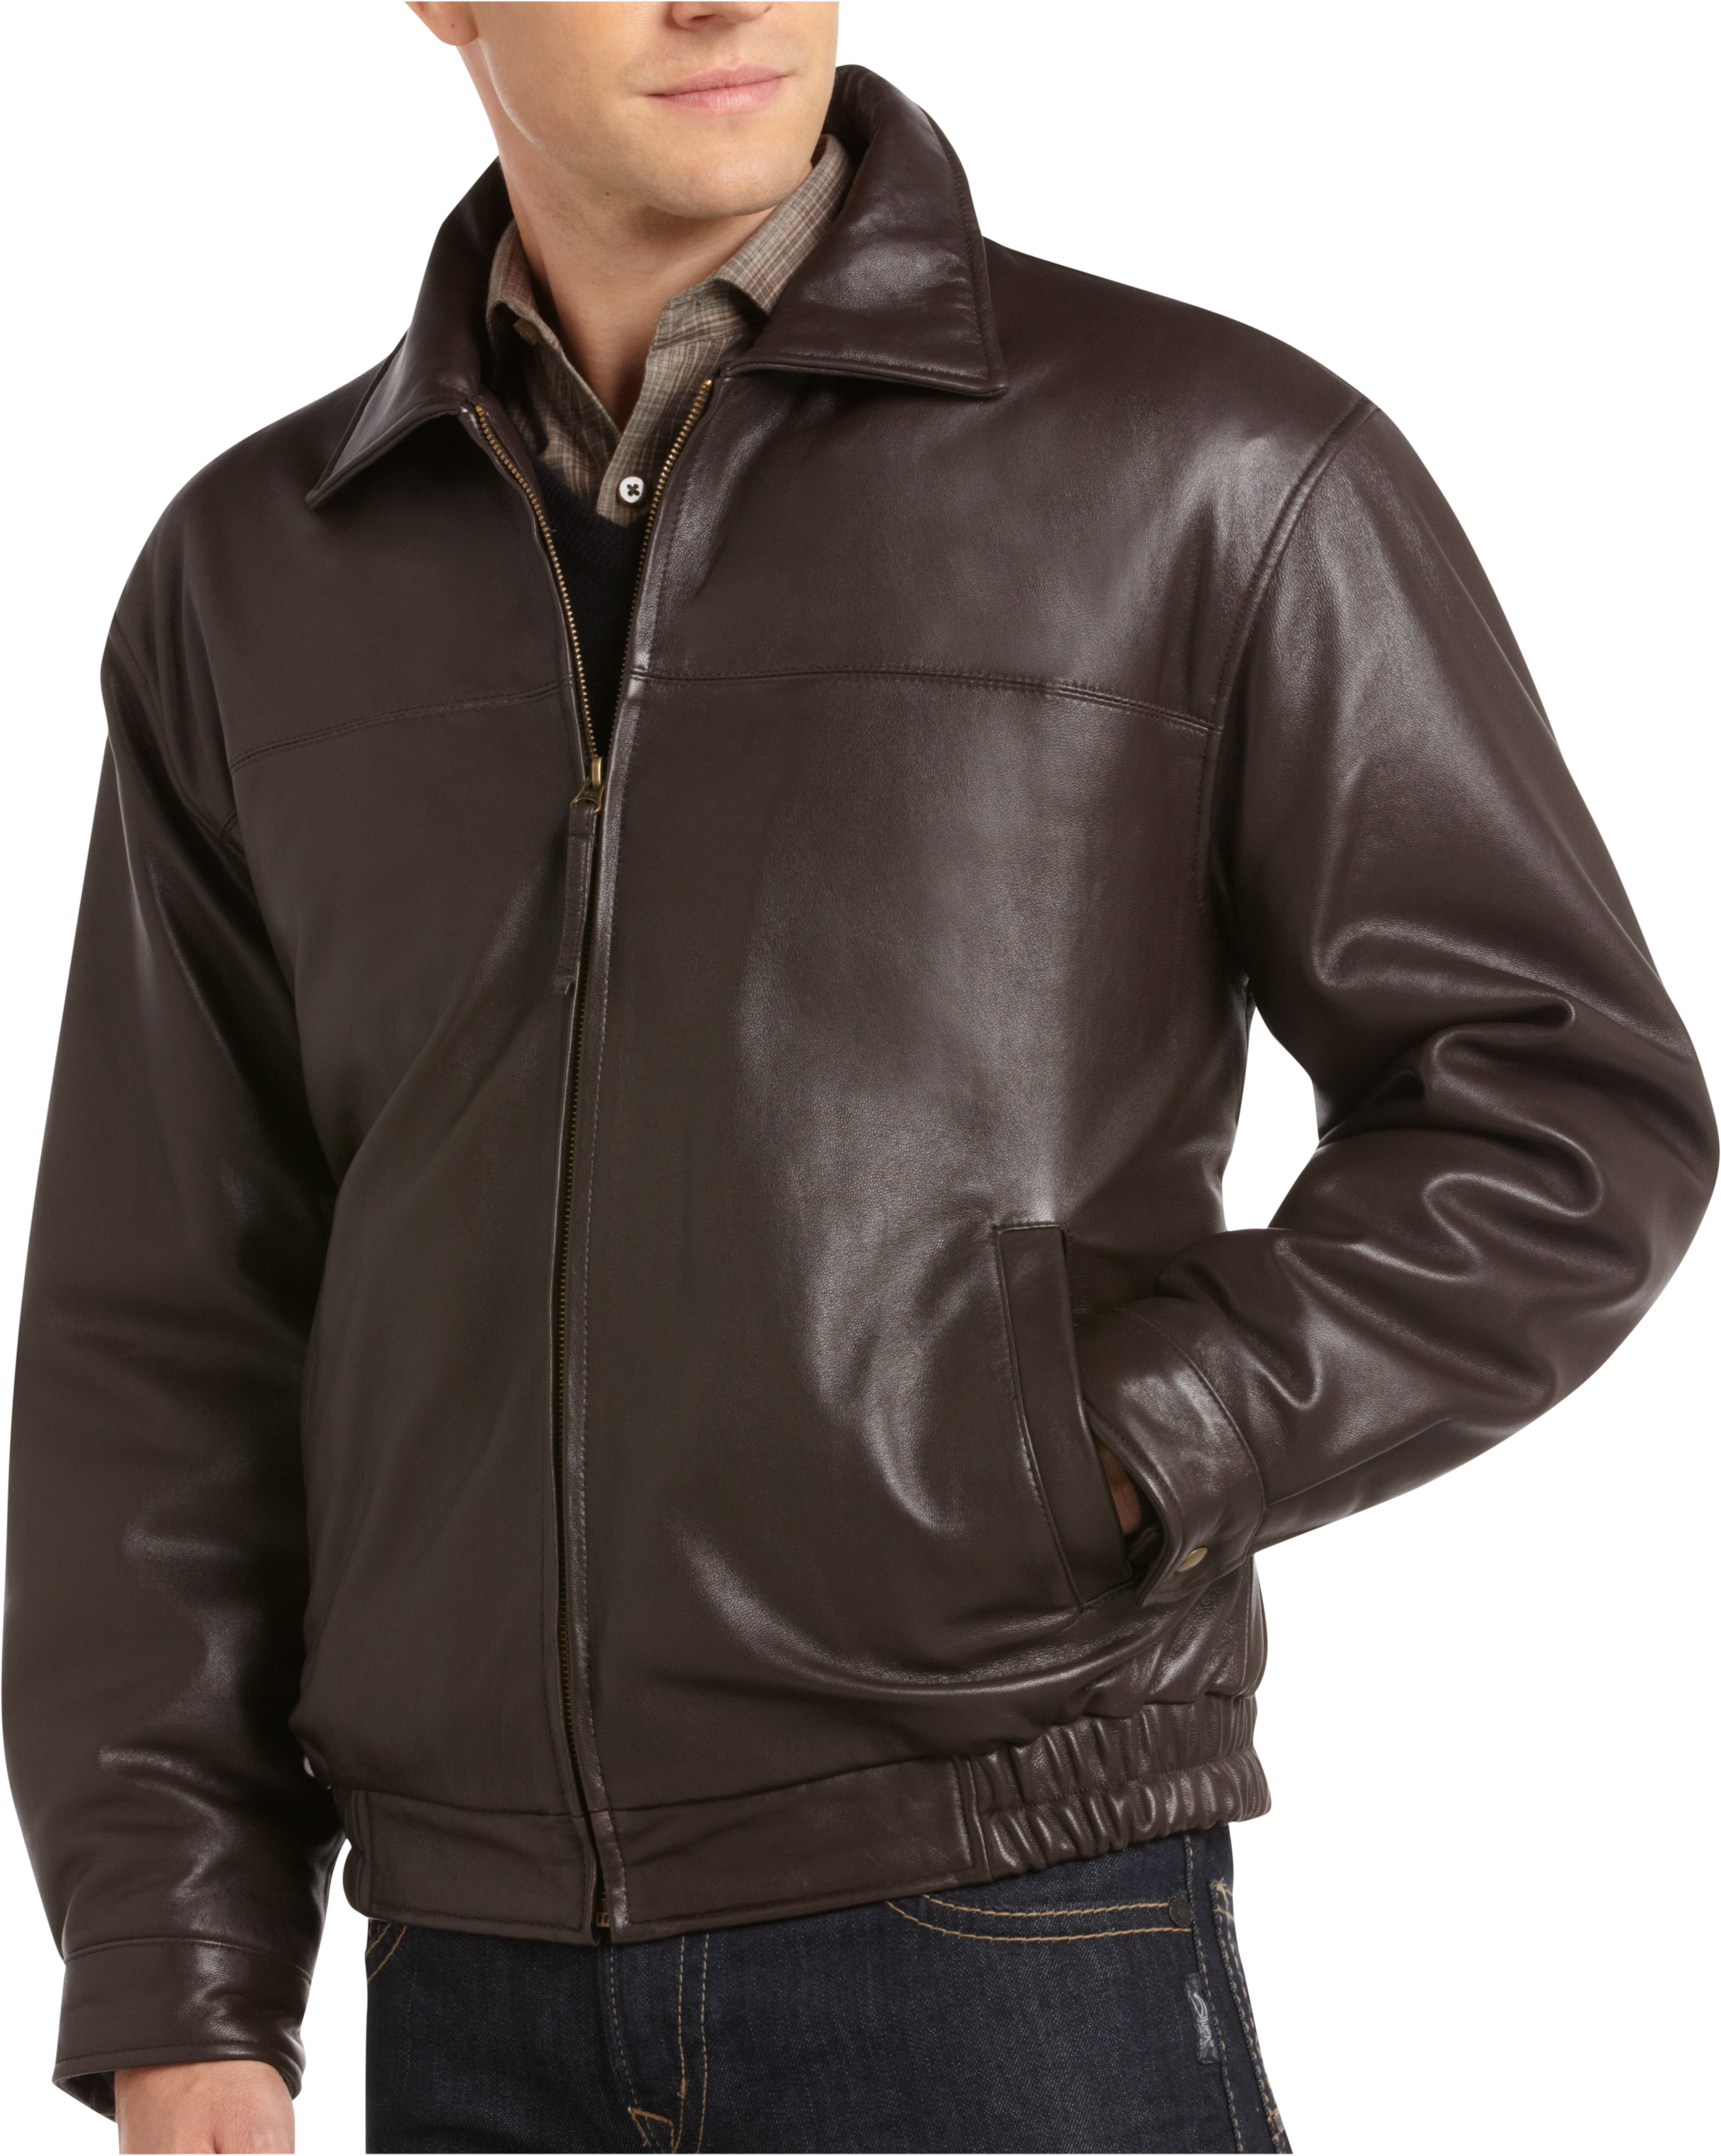 Joseph & Feiss Brown Lambskin Leather Bomber Classic Fit Jacket - Men's ...